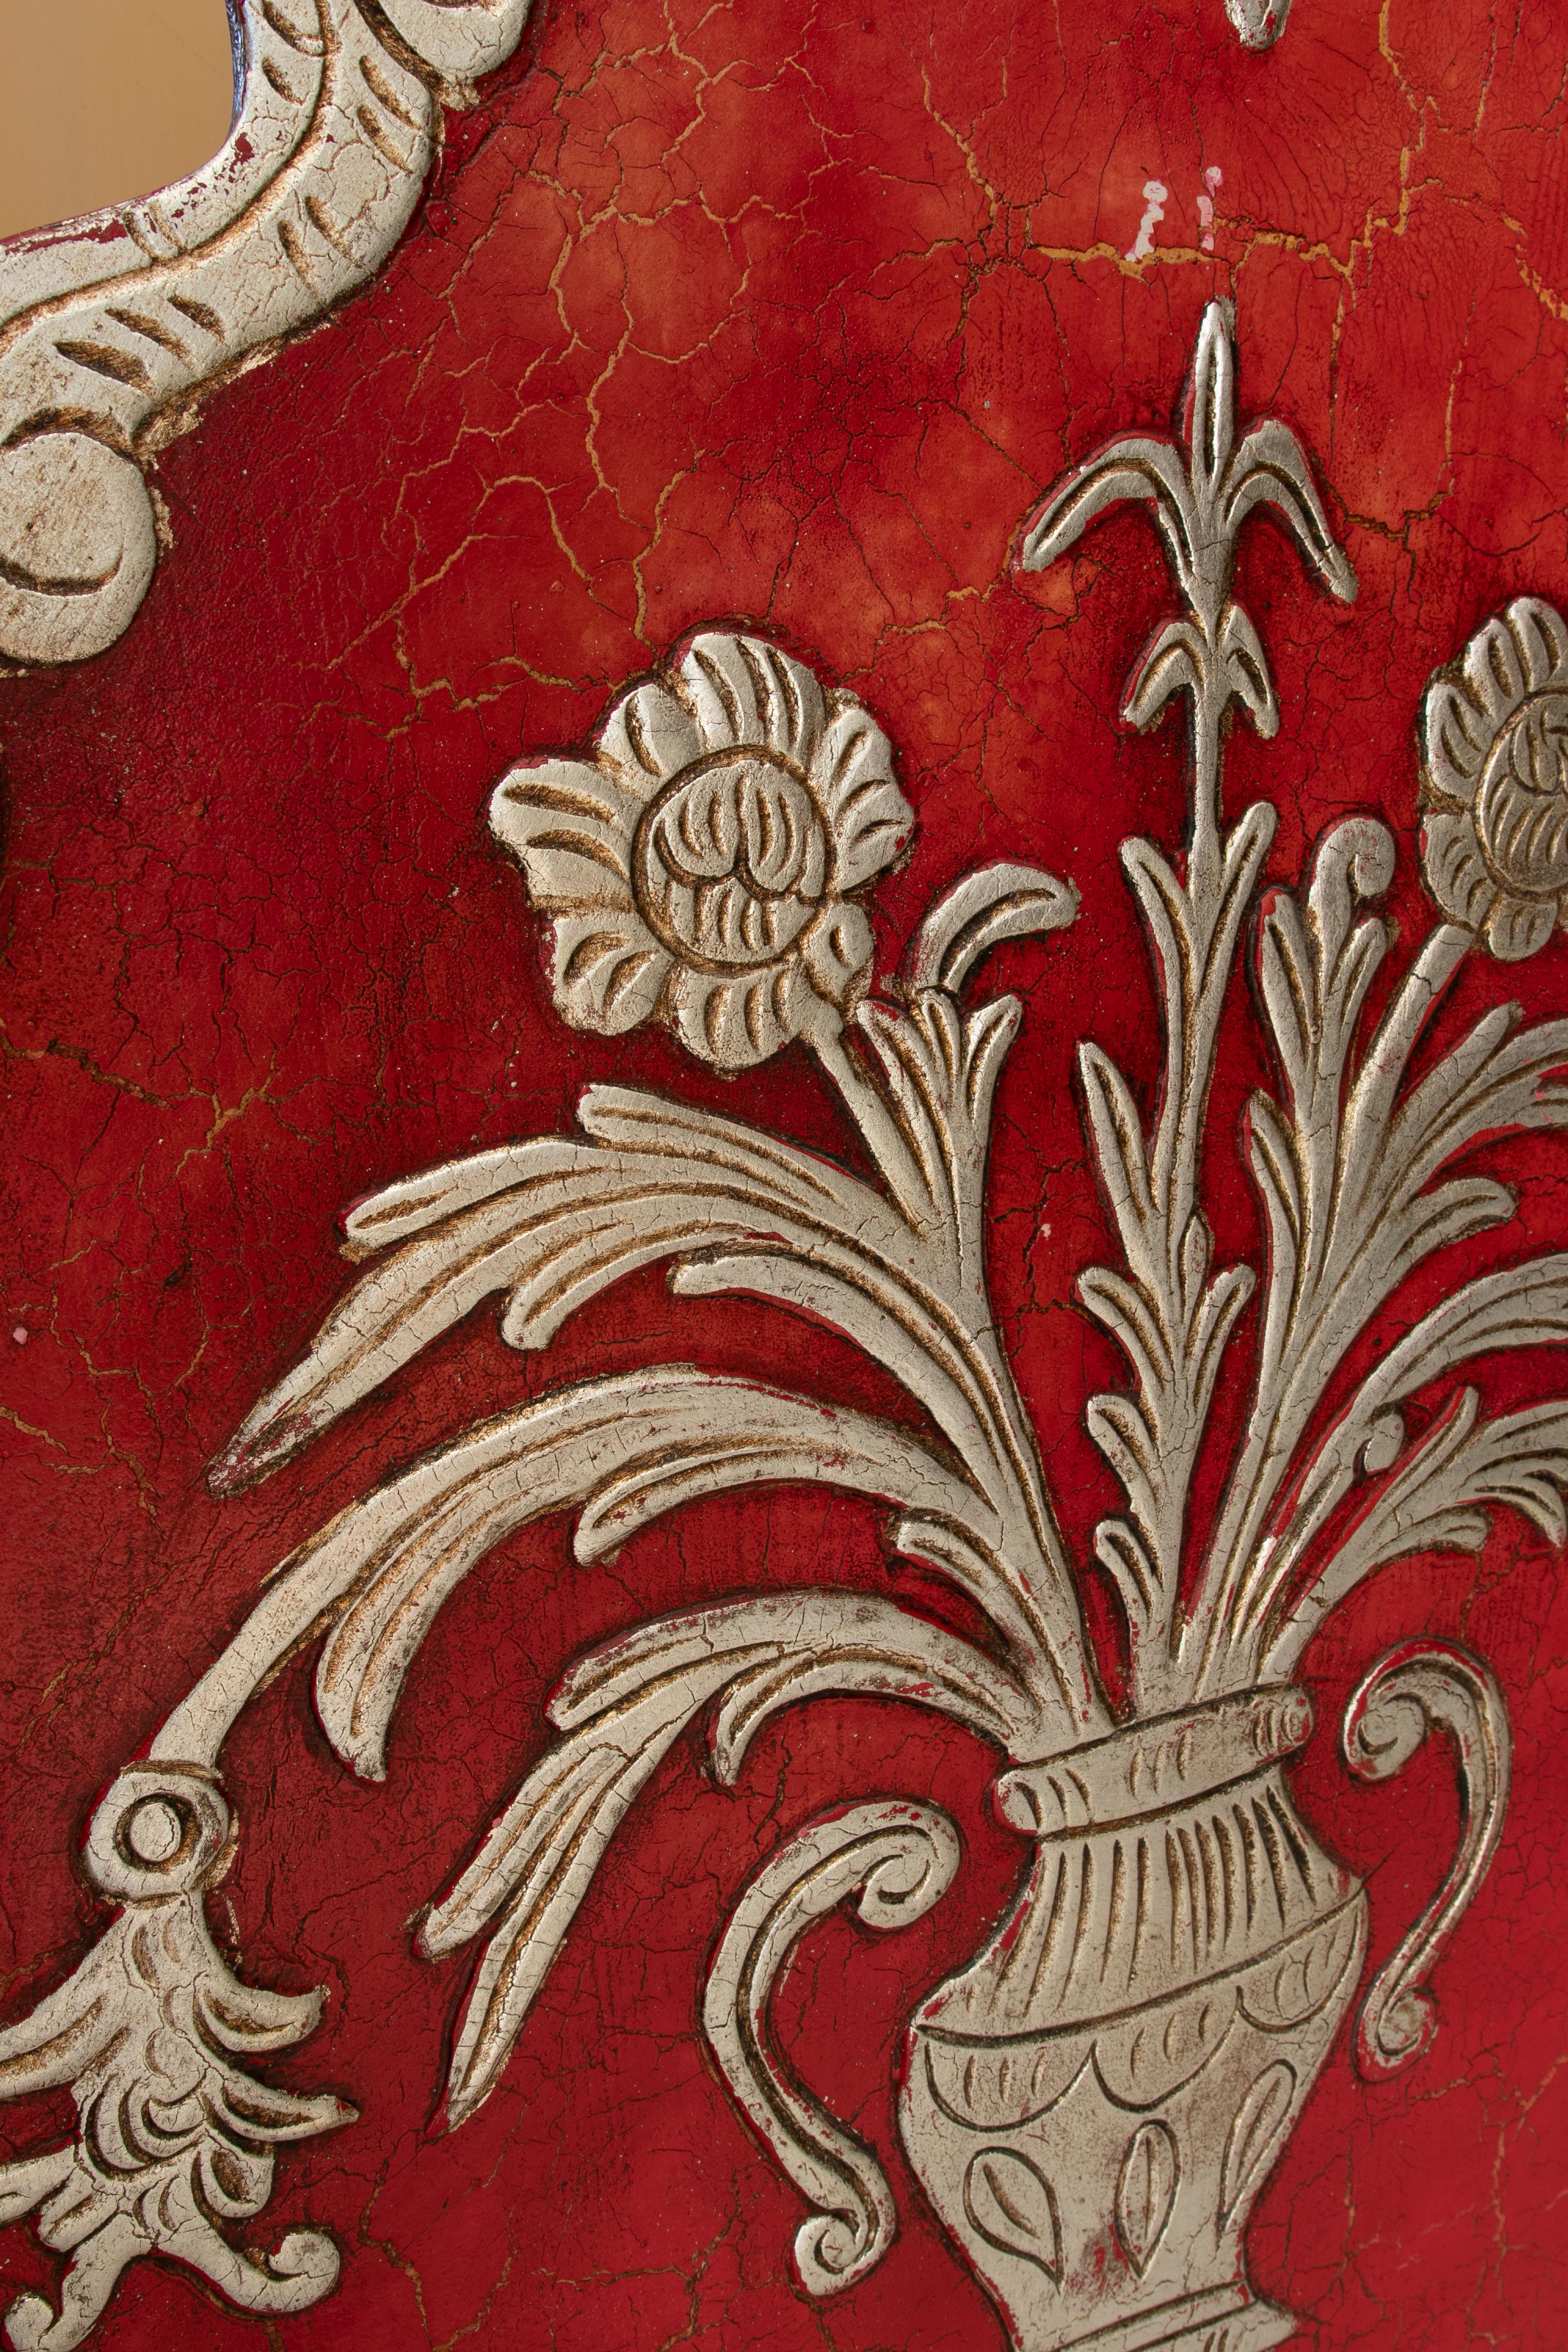 Hand-Painted Pair of Hand Carved Wooden Headboards in Red and Silver For Sale